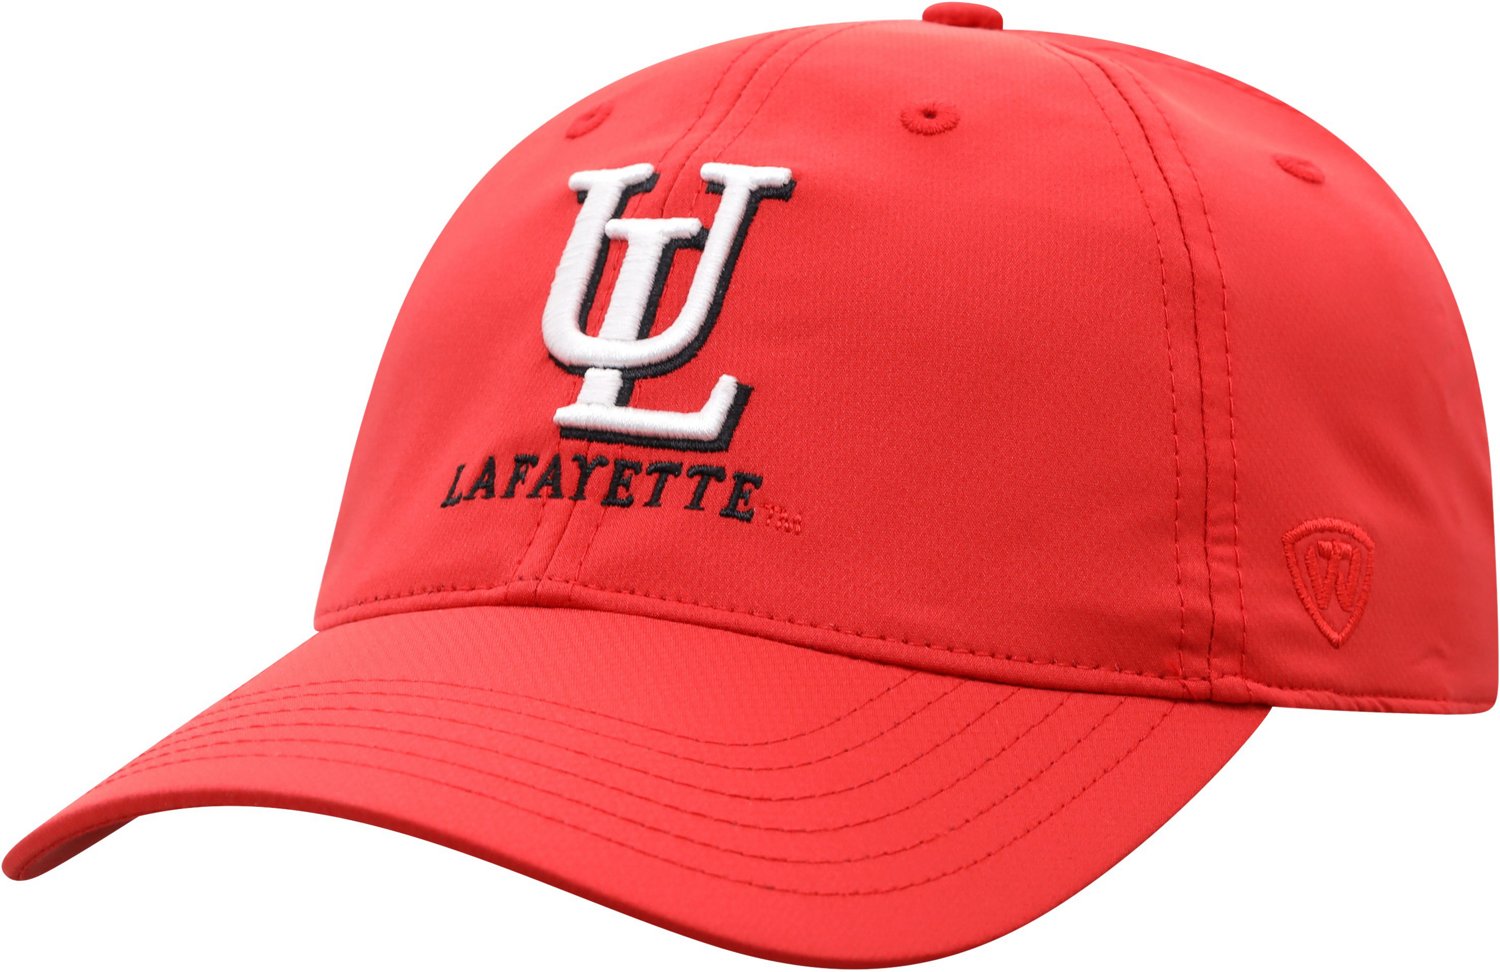 Top of the World University of Louisiana at Lafayette Trainer 20 ...